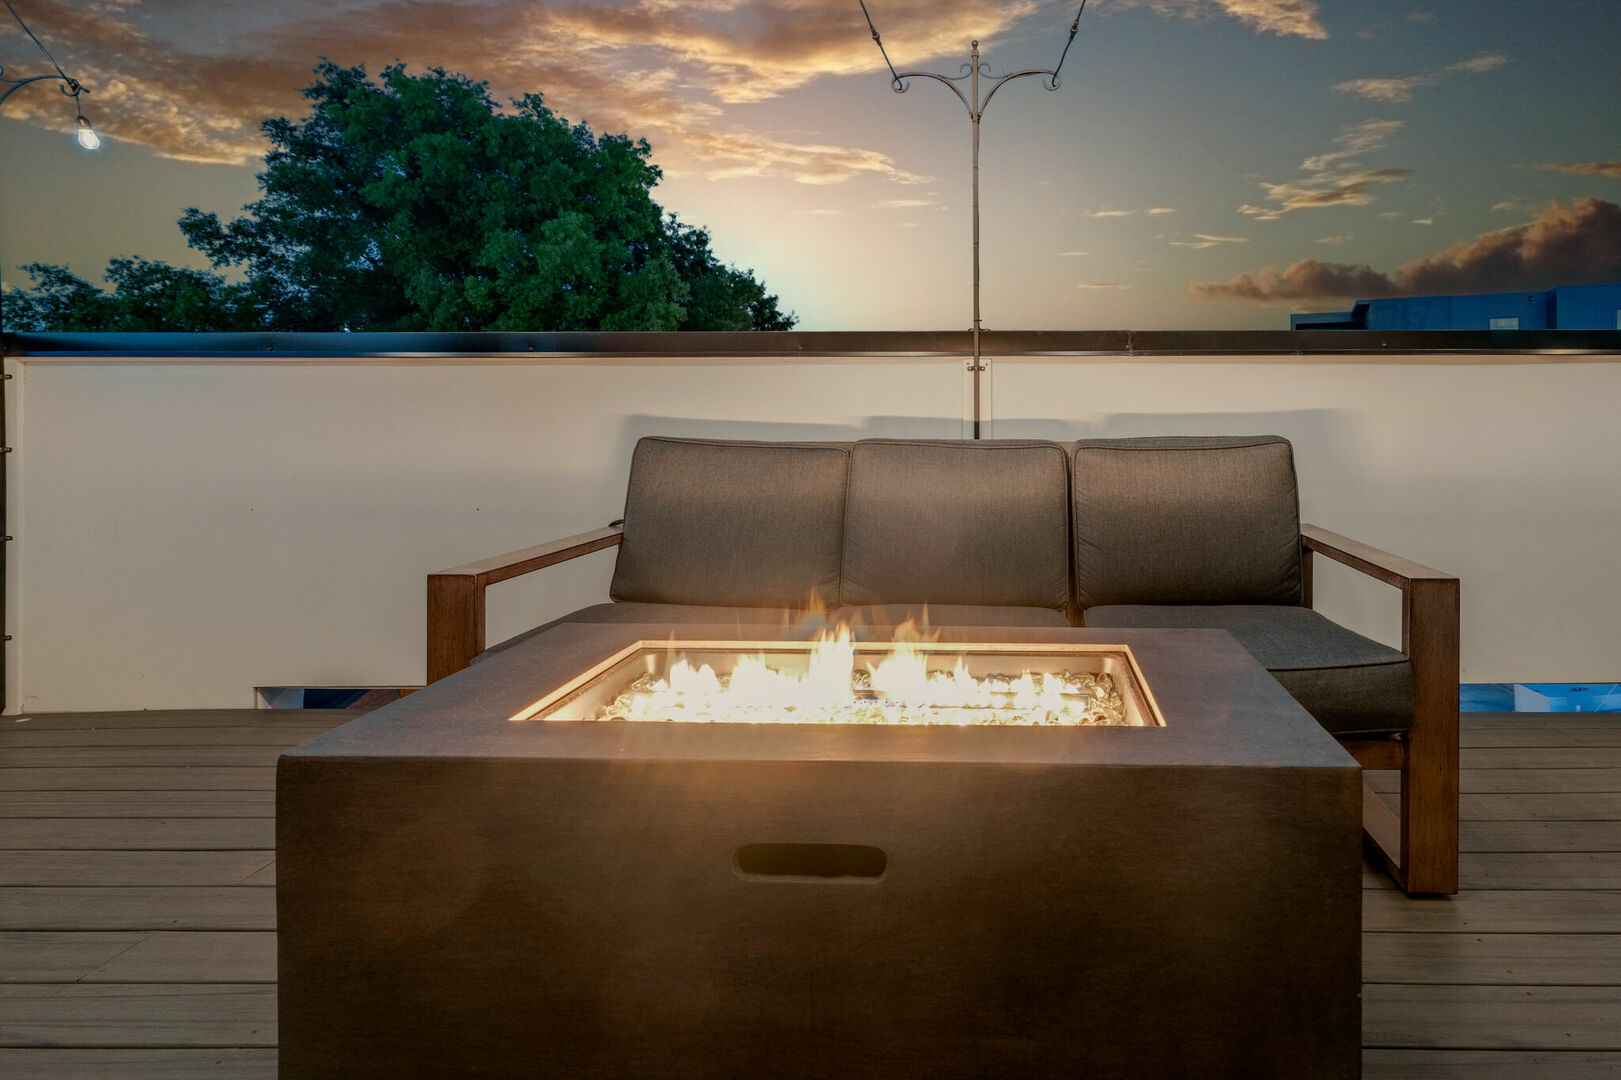 2nd unit: Rooftop patio with fire pit, outdoor bbq grill and lounge area draped in bistro lights.